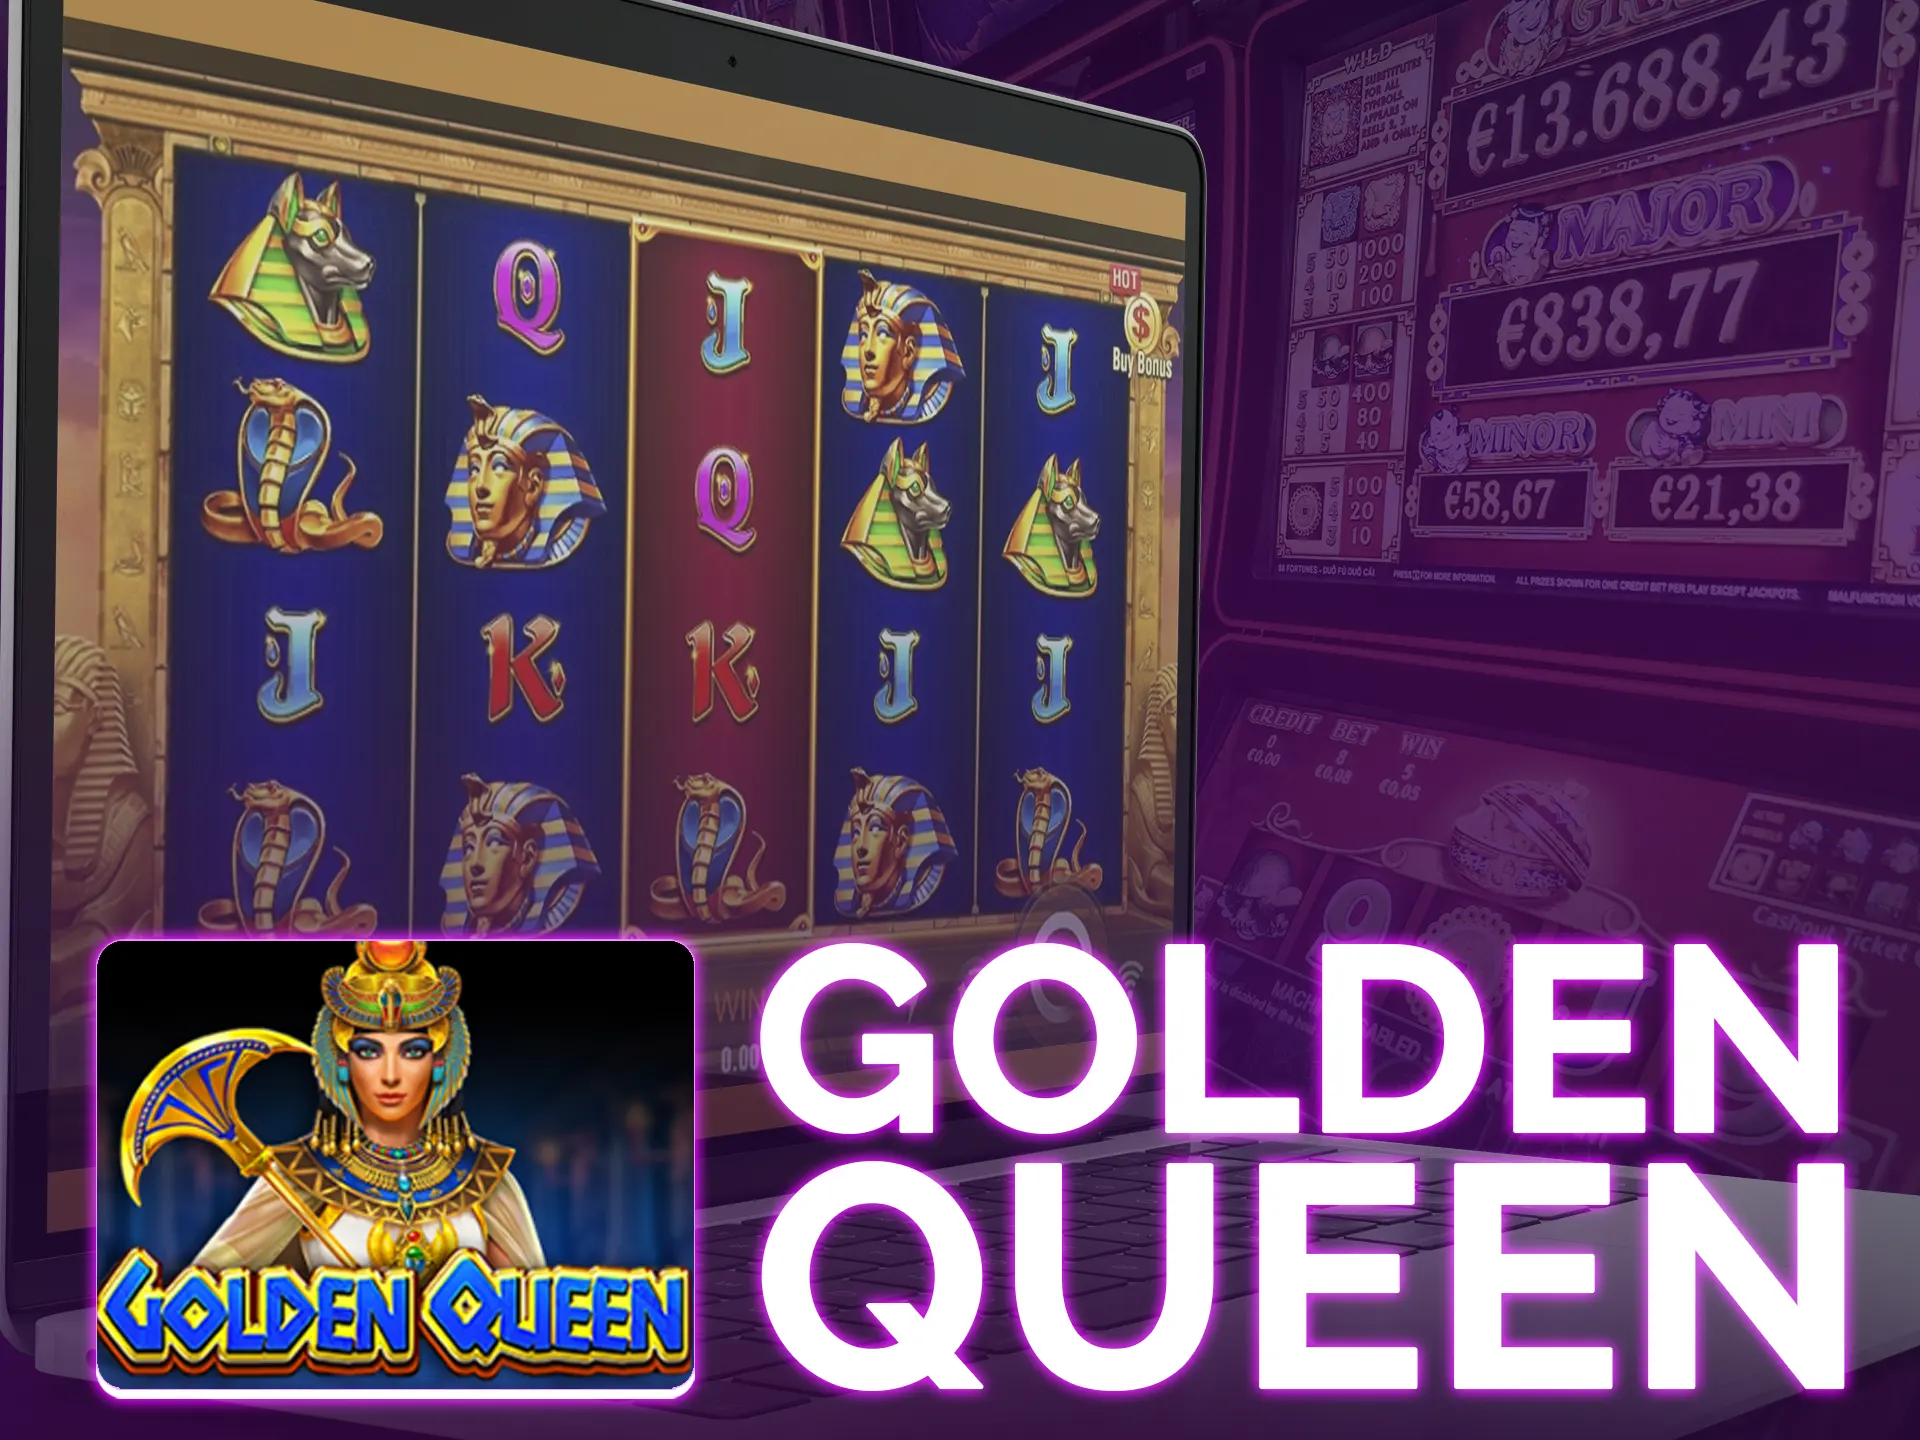 Golden queen it`s an egyptian-themed slot: x1500 max win, 96.5% RTP, 5 reels, 40 paylines.